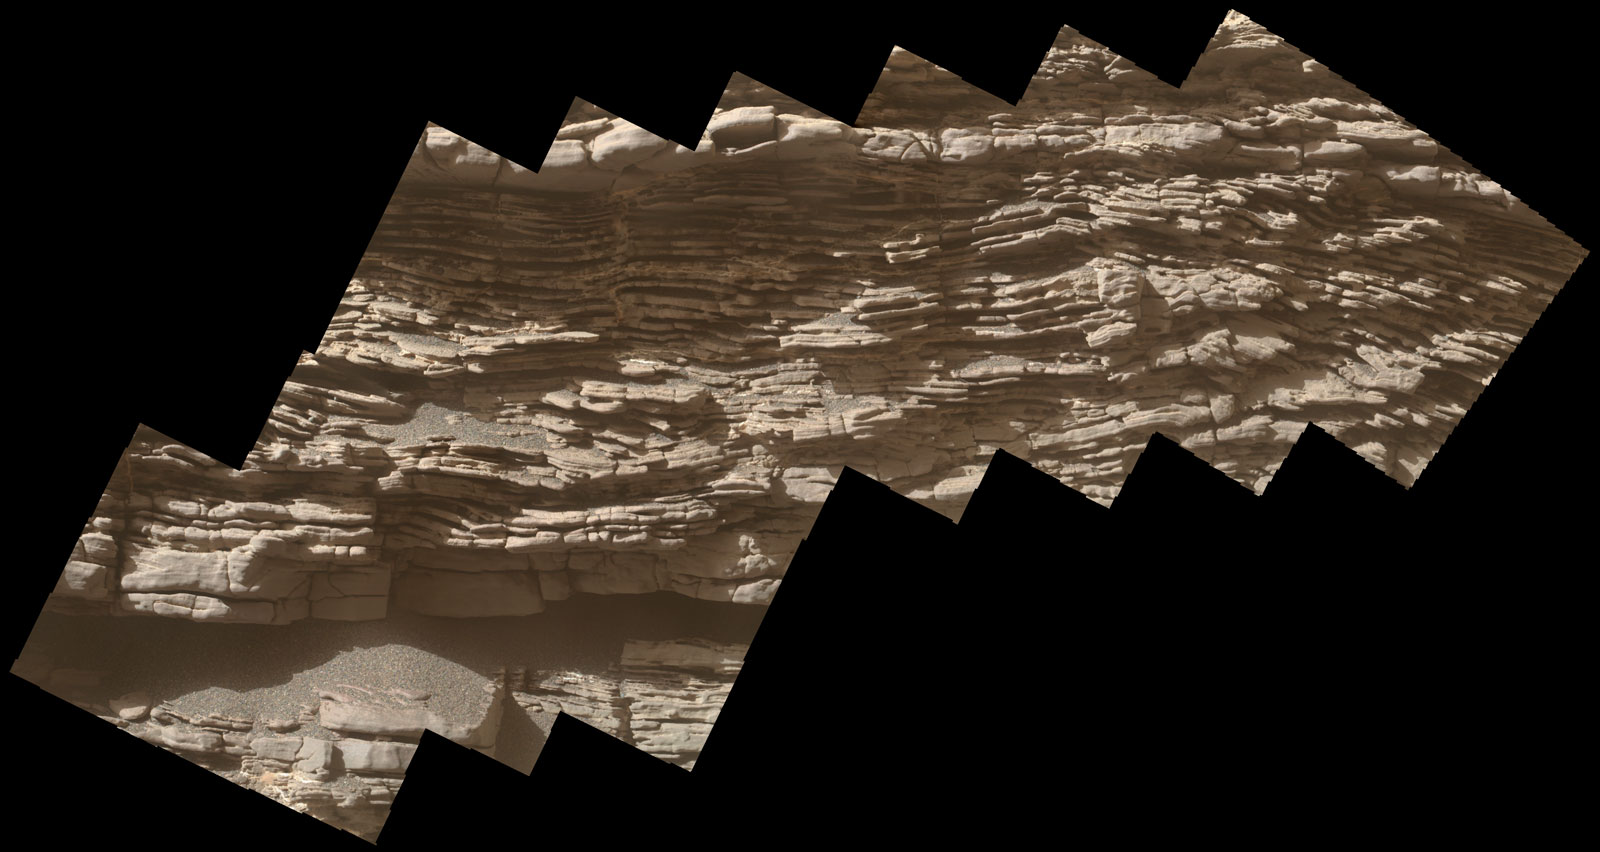 This mosaic of images shows layers of sediment on a boulder-sized rock called "Strathdon," as seen by the Mars Hand Lens Imager (MAHLI) camera carried by NASA's Curiosity rover. The images were taken on July 10, 2019, the 2,462nd Martian day, or sol, of the mission.